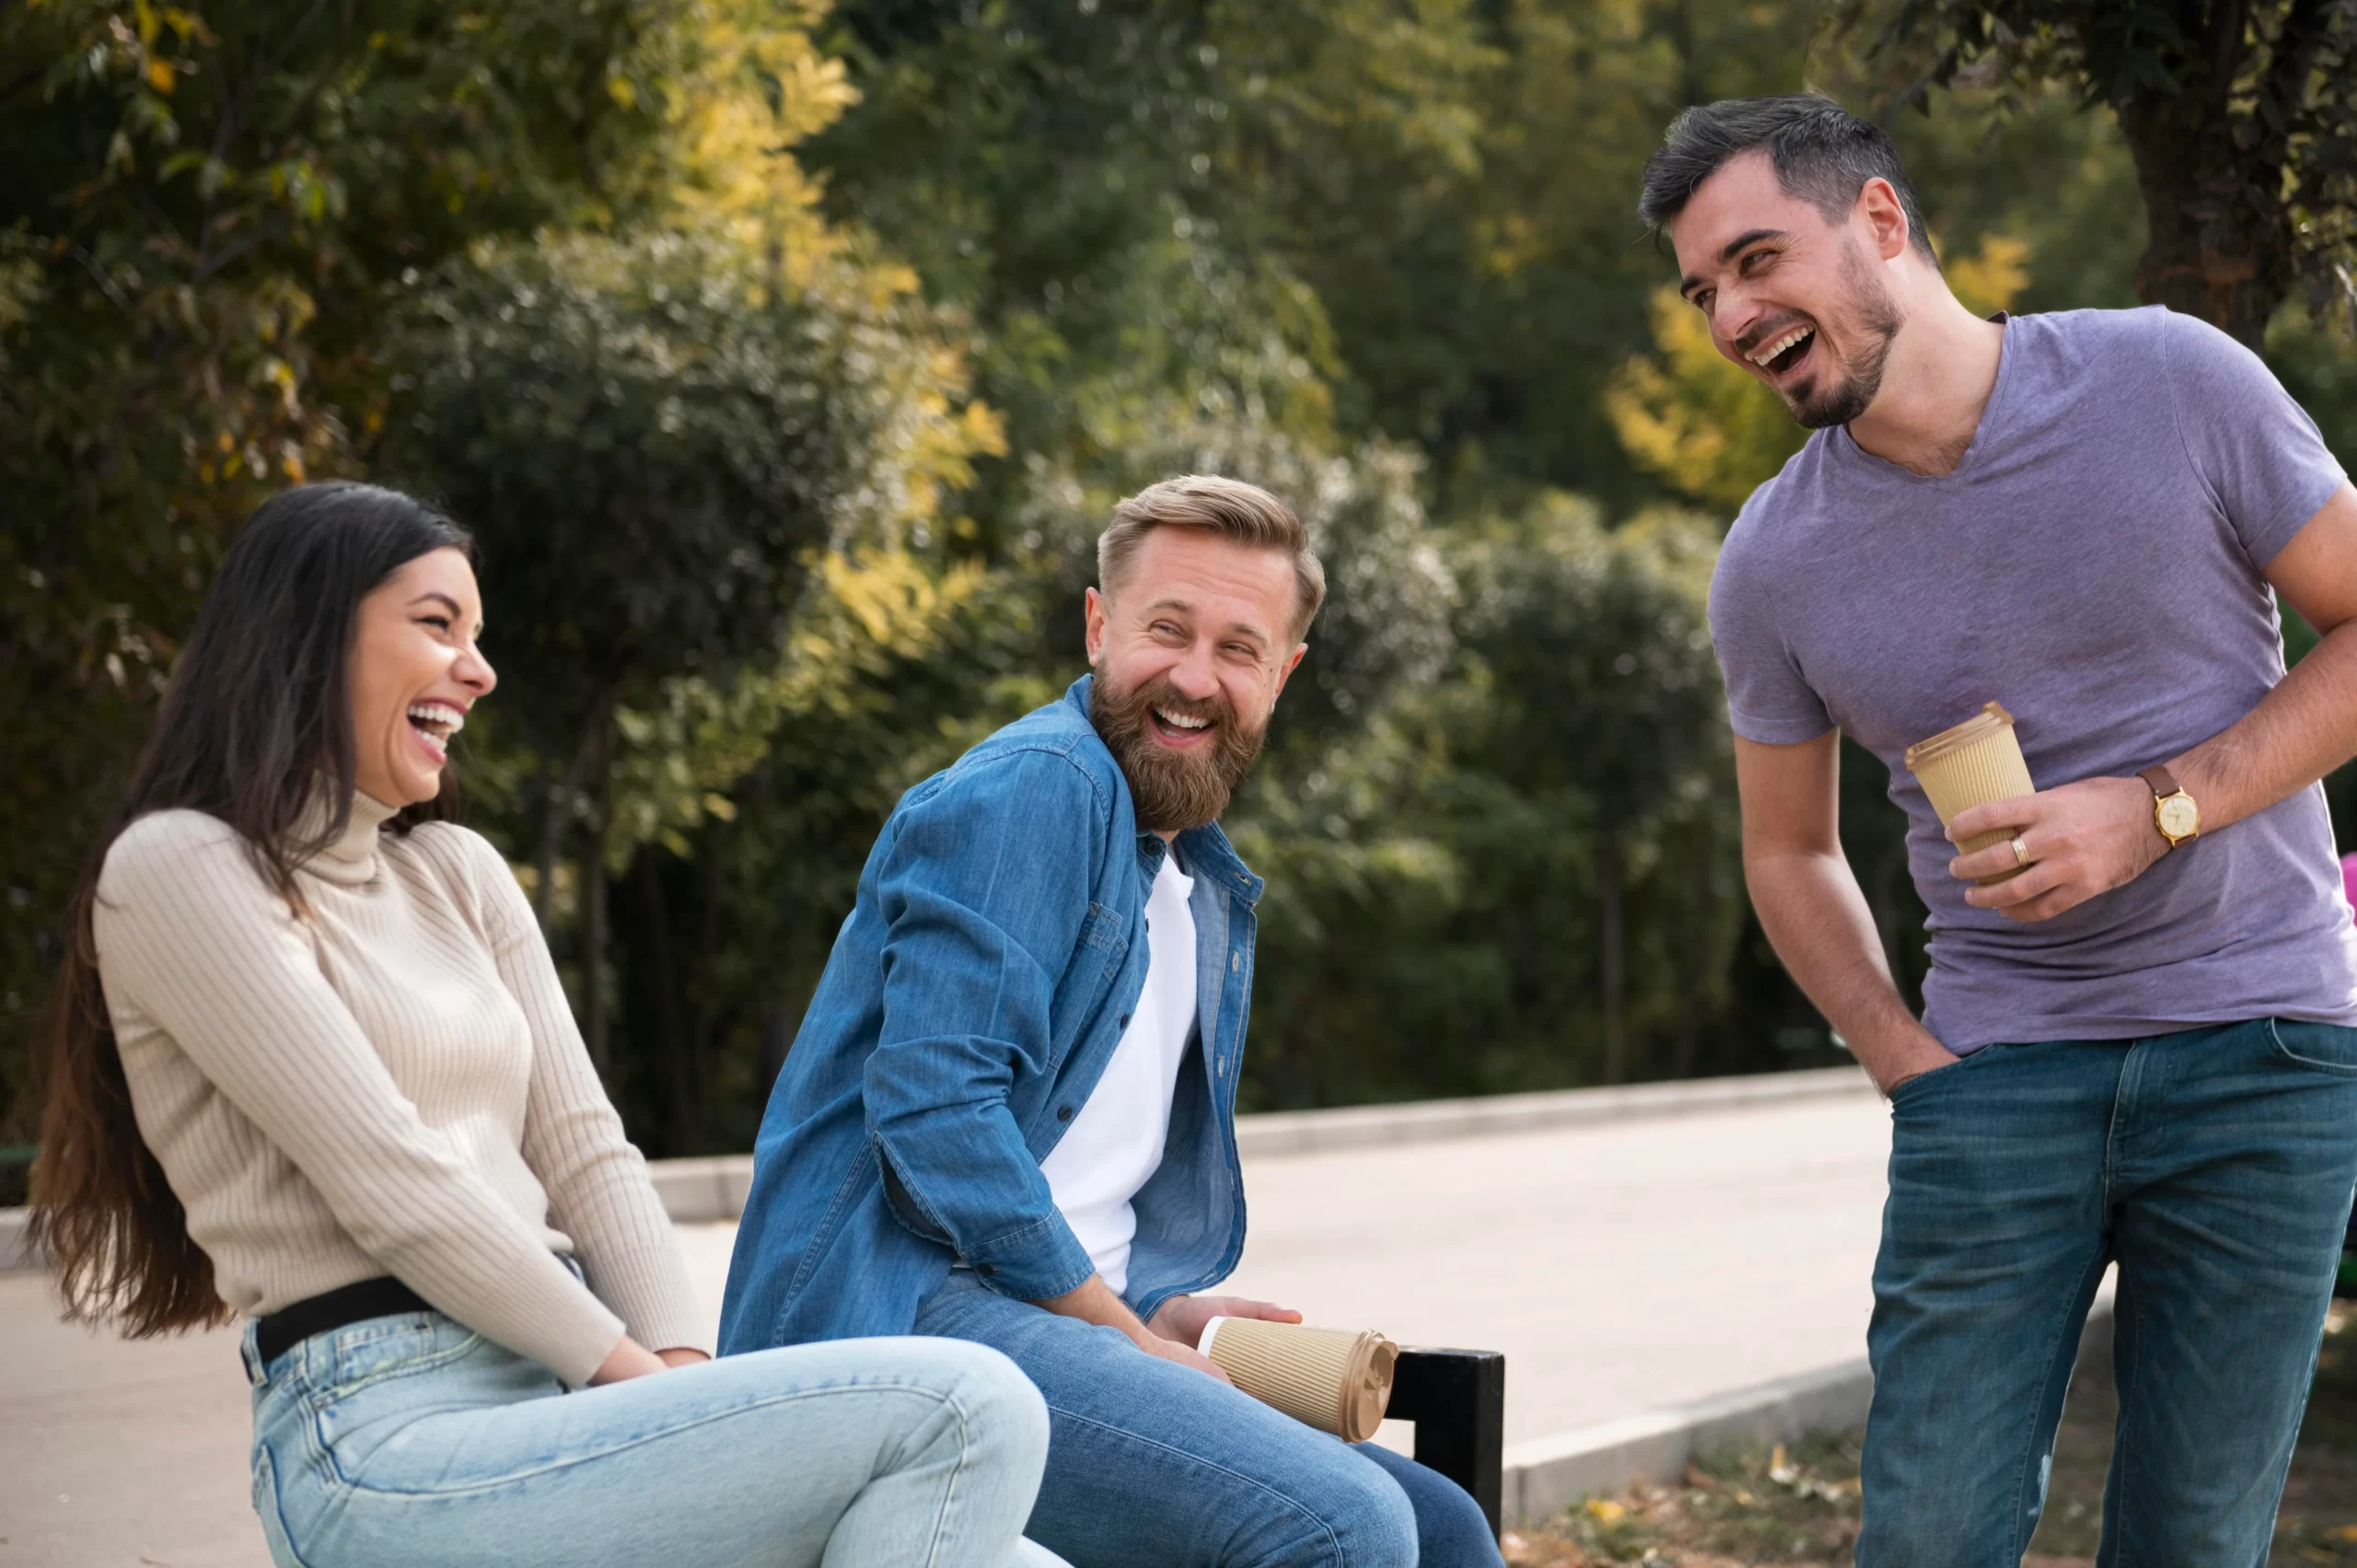 Three friends are laughing and enjoying each other's company in a park, which improves overall health by reducing stress, boosting mood, and strengthening social bonds.